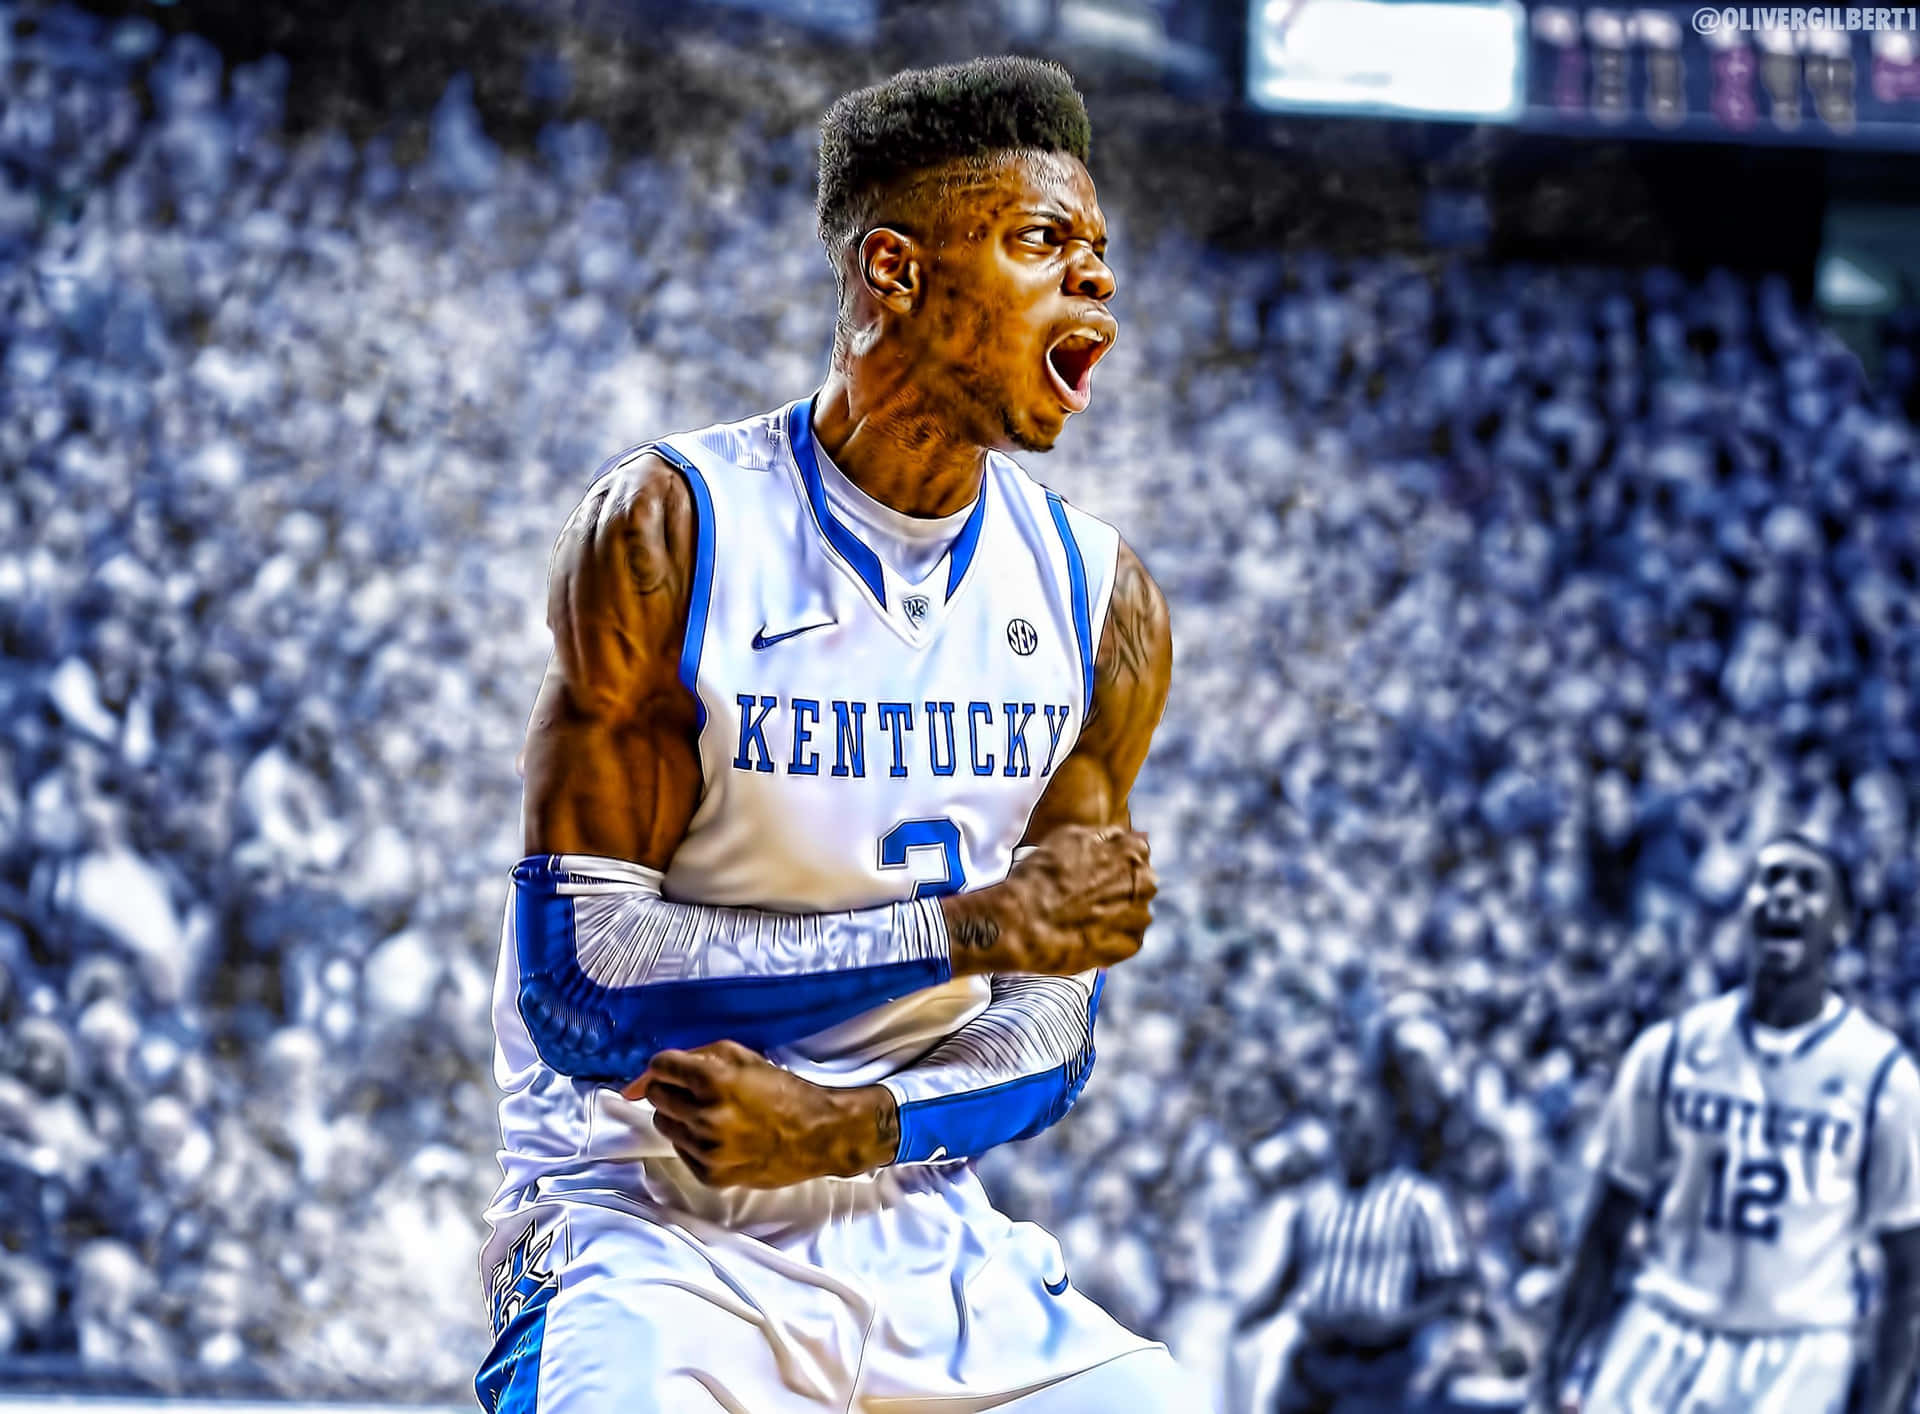 Kentucky Wildcats Basketball Player Celebrating In Front Of A Crowd Wallpaper